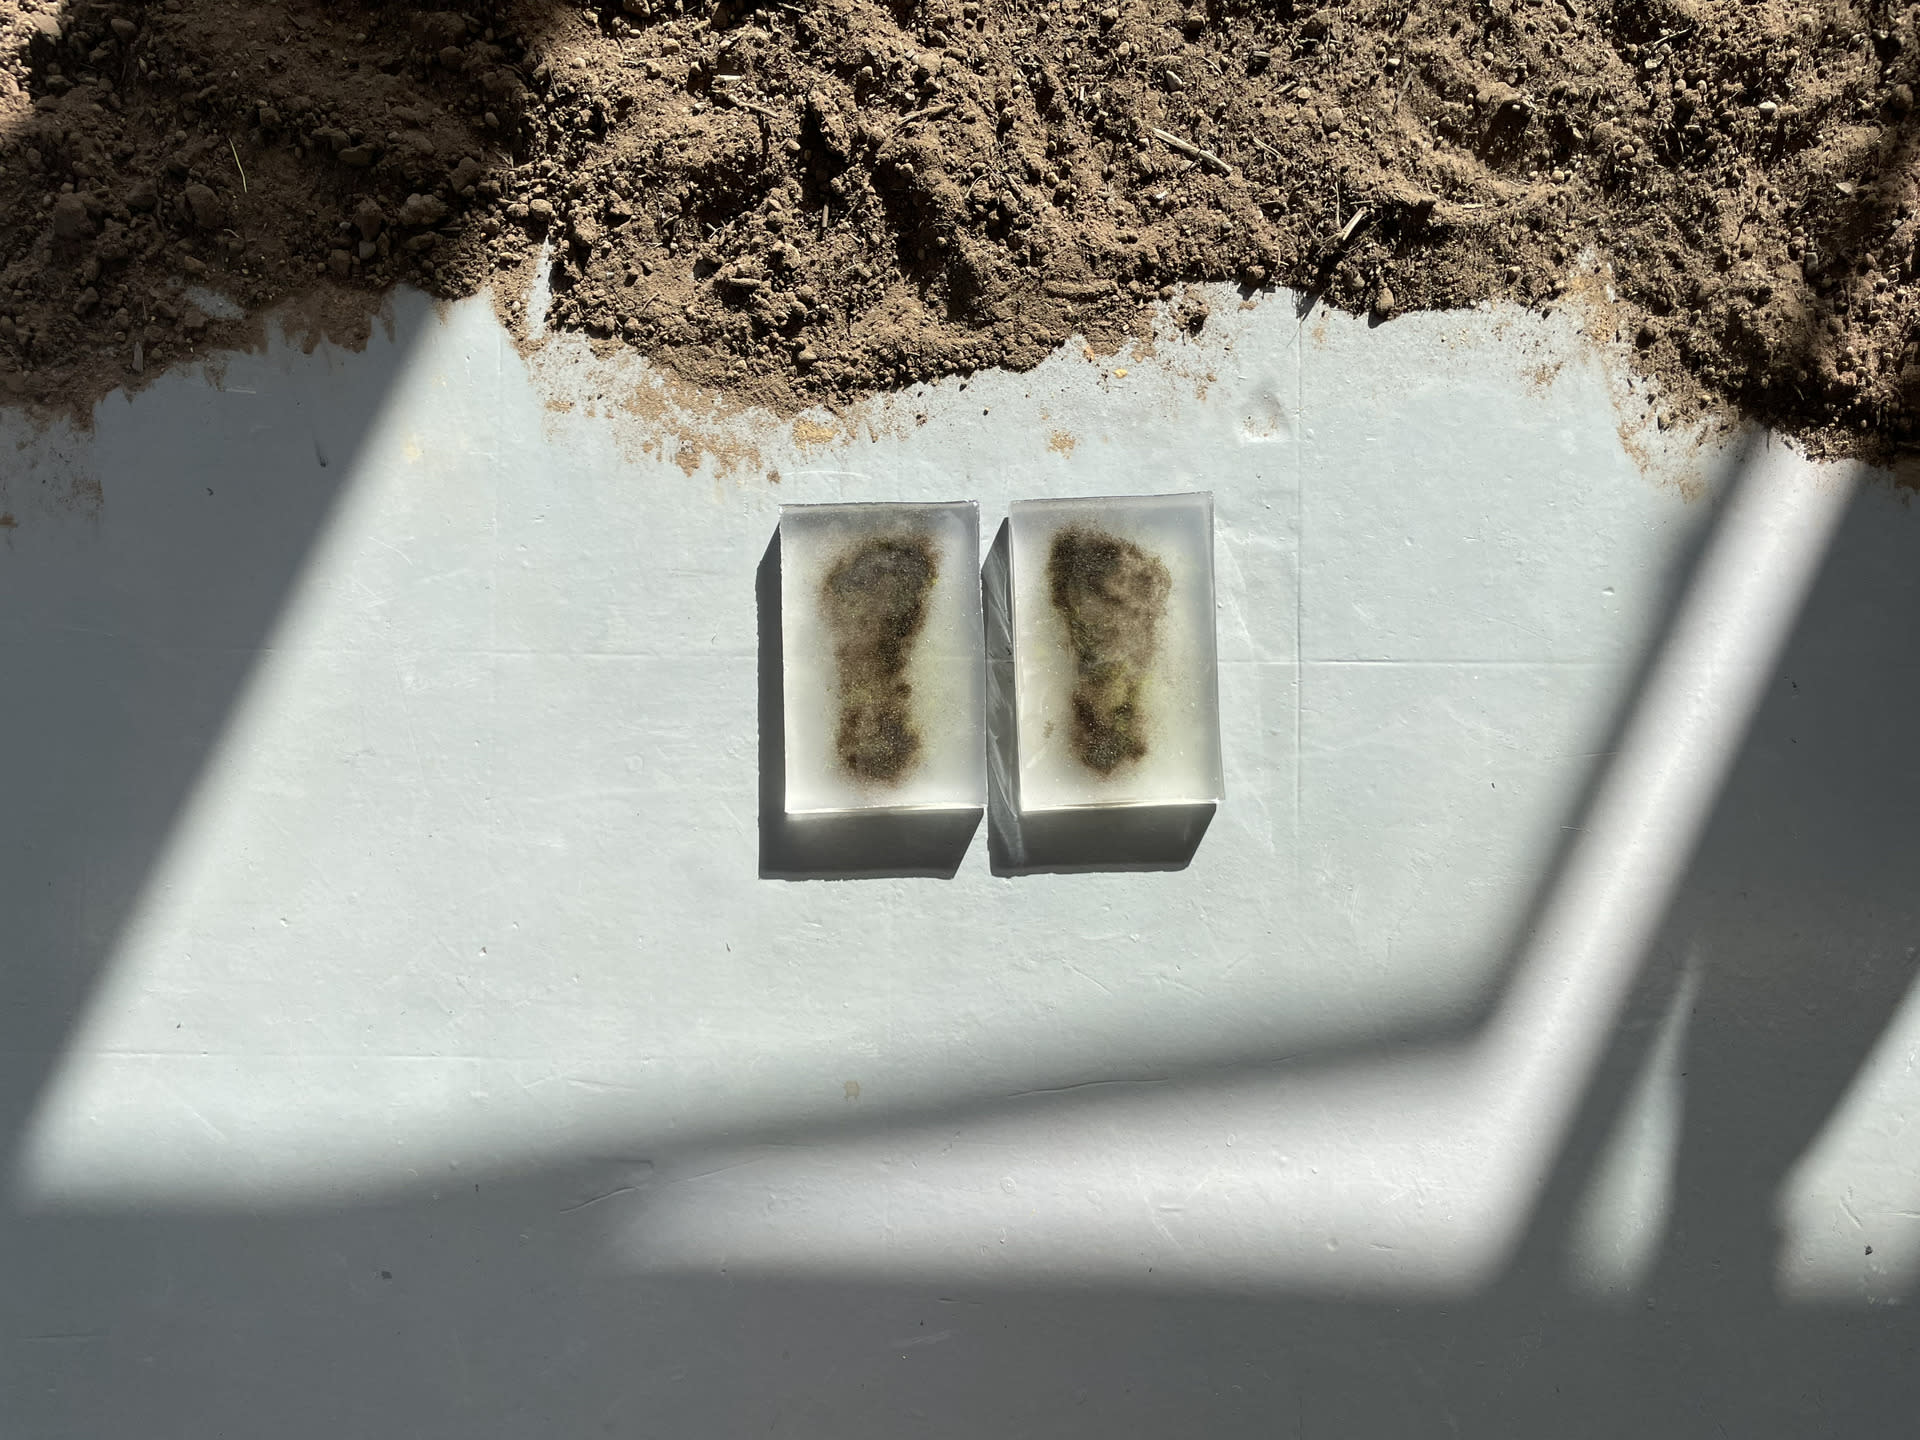 Dirt in the shape of a footprint captured in acrylic blocks